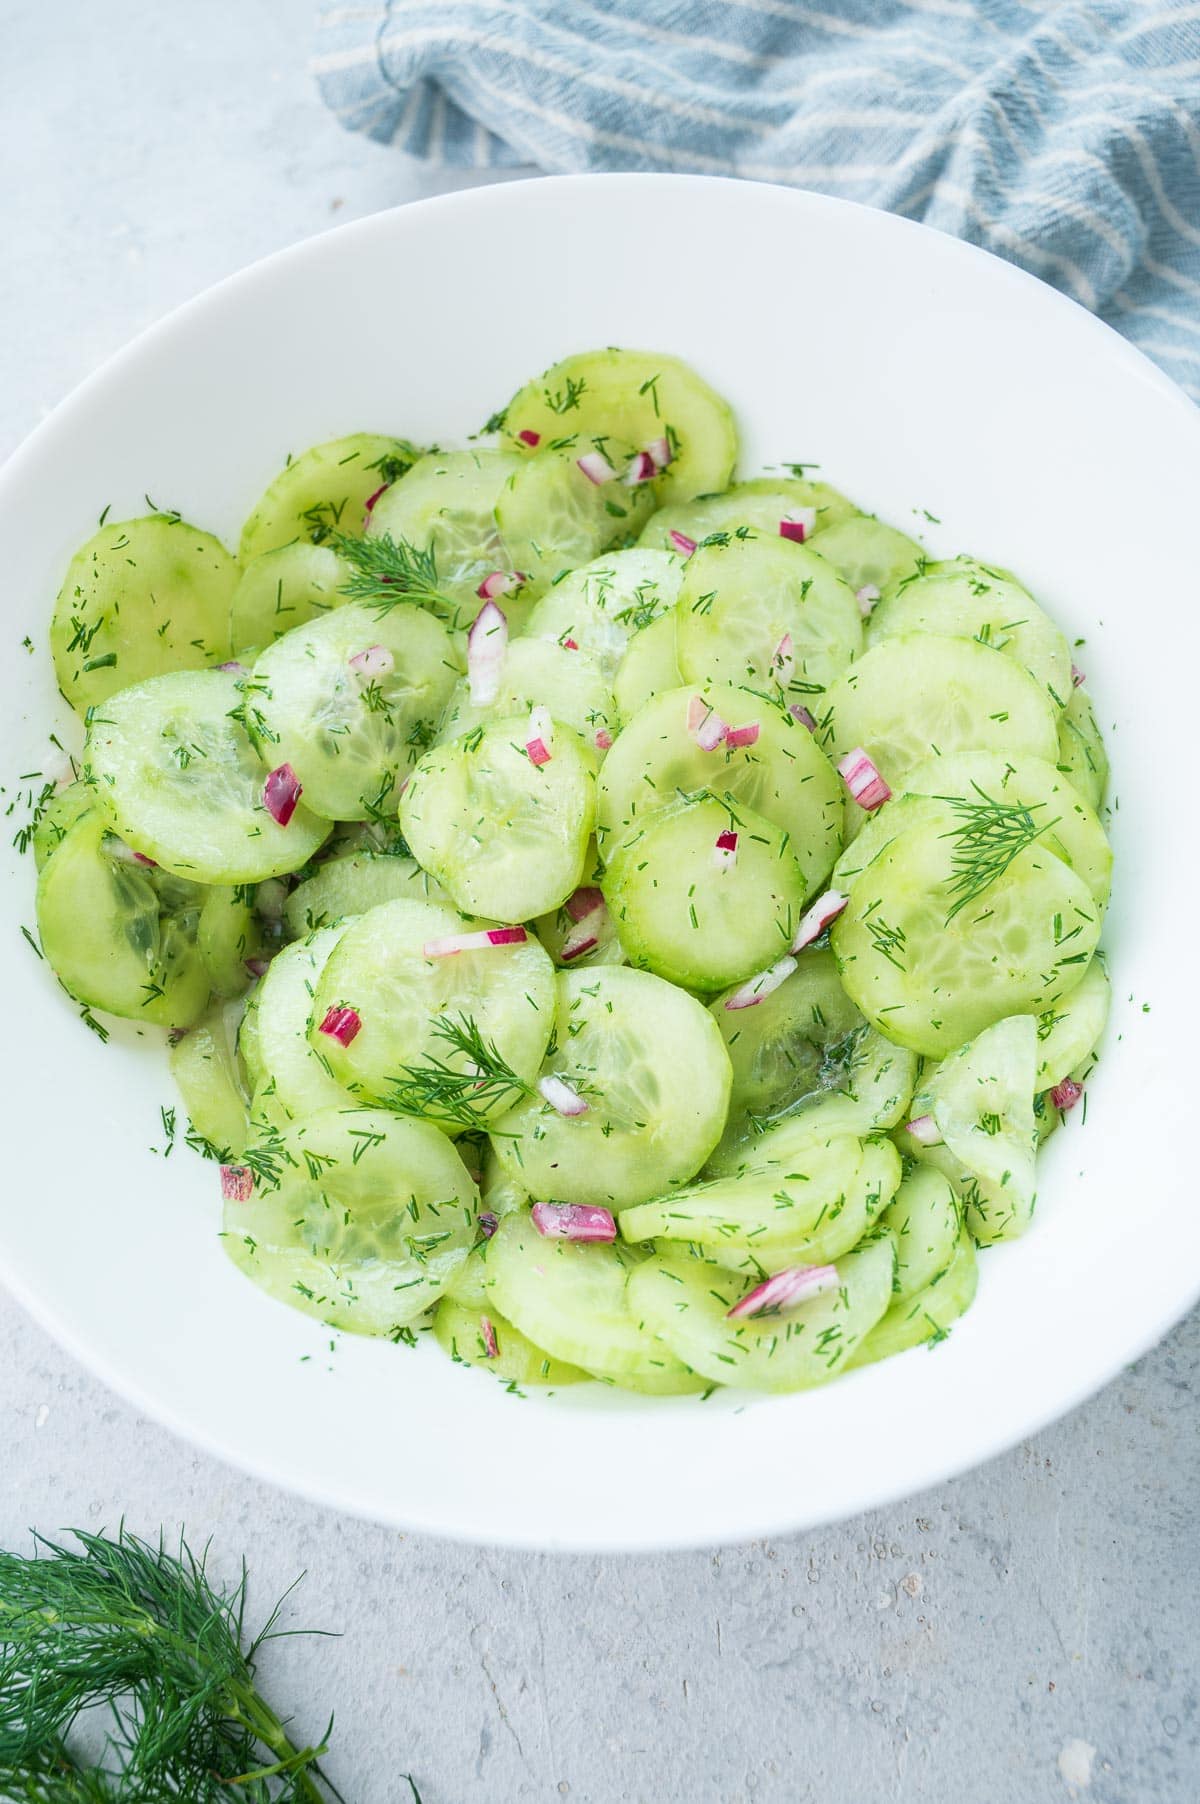 German cucumber salad in a white plate.